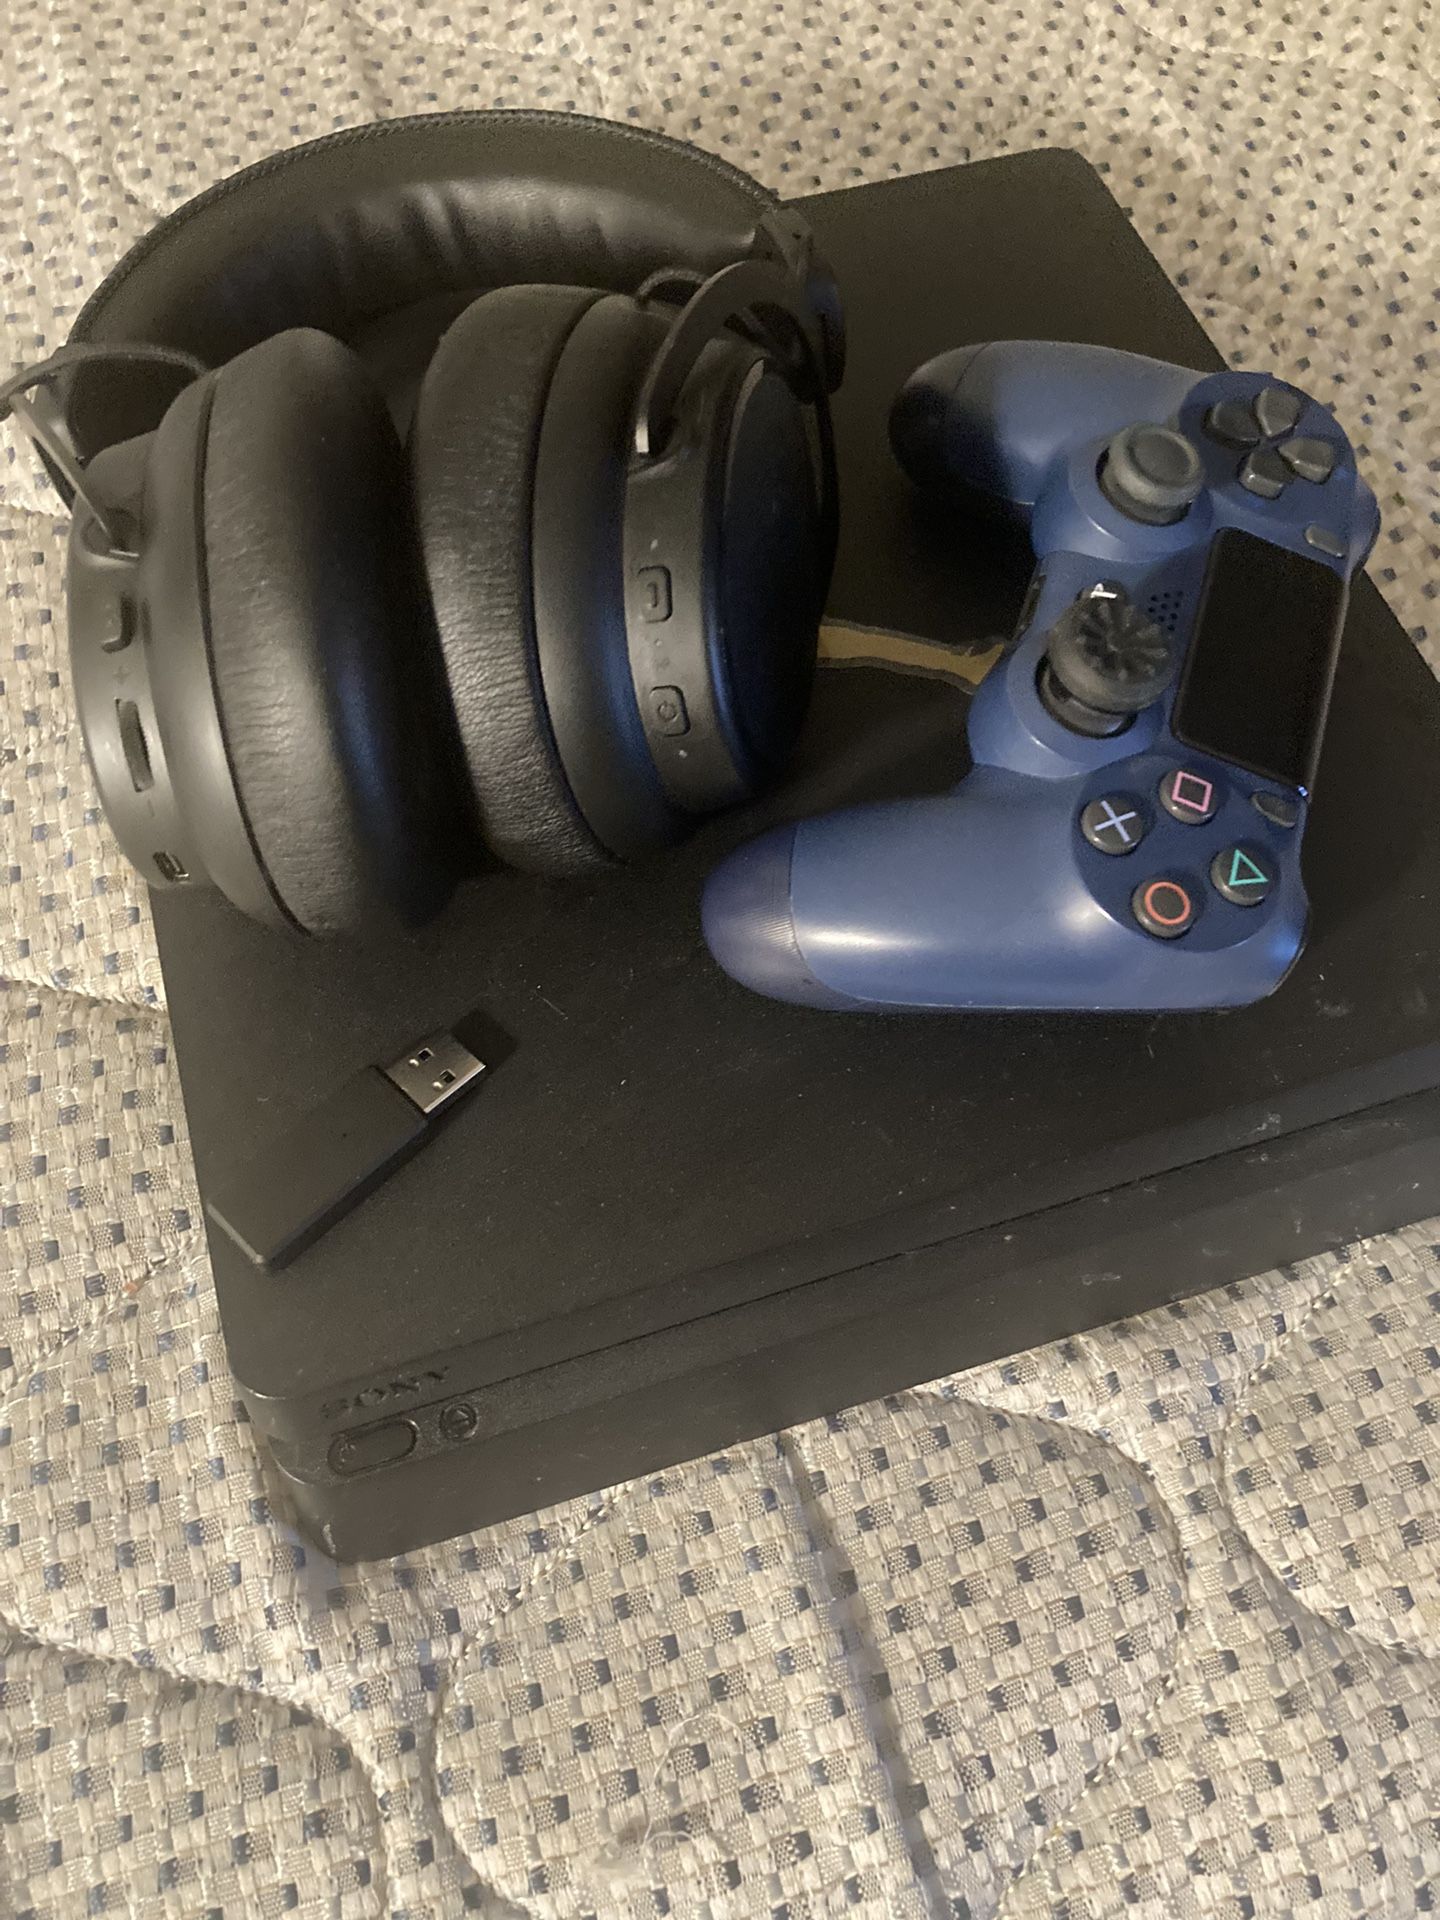 Ps4 1TB With Cords And Perfect Gaming Headsets